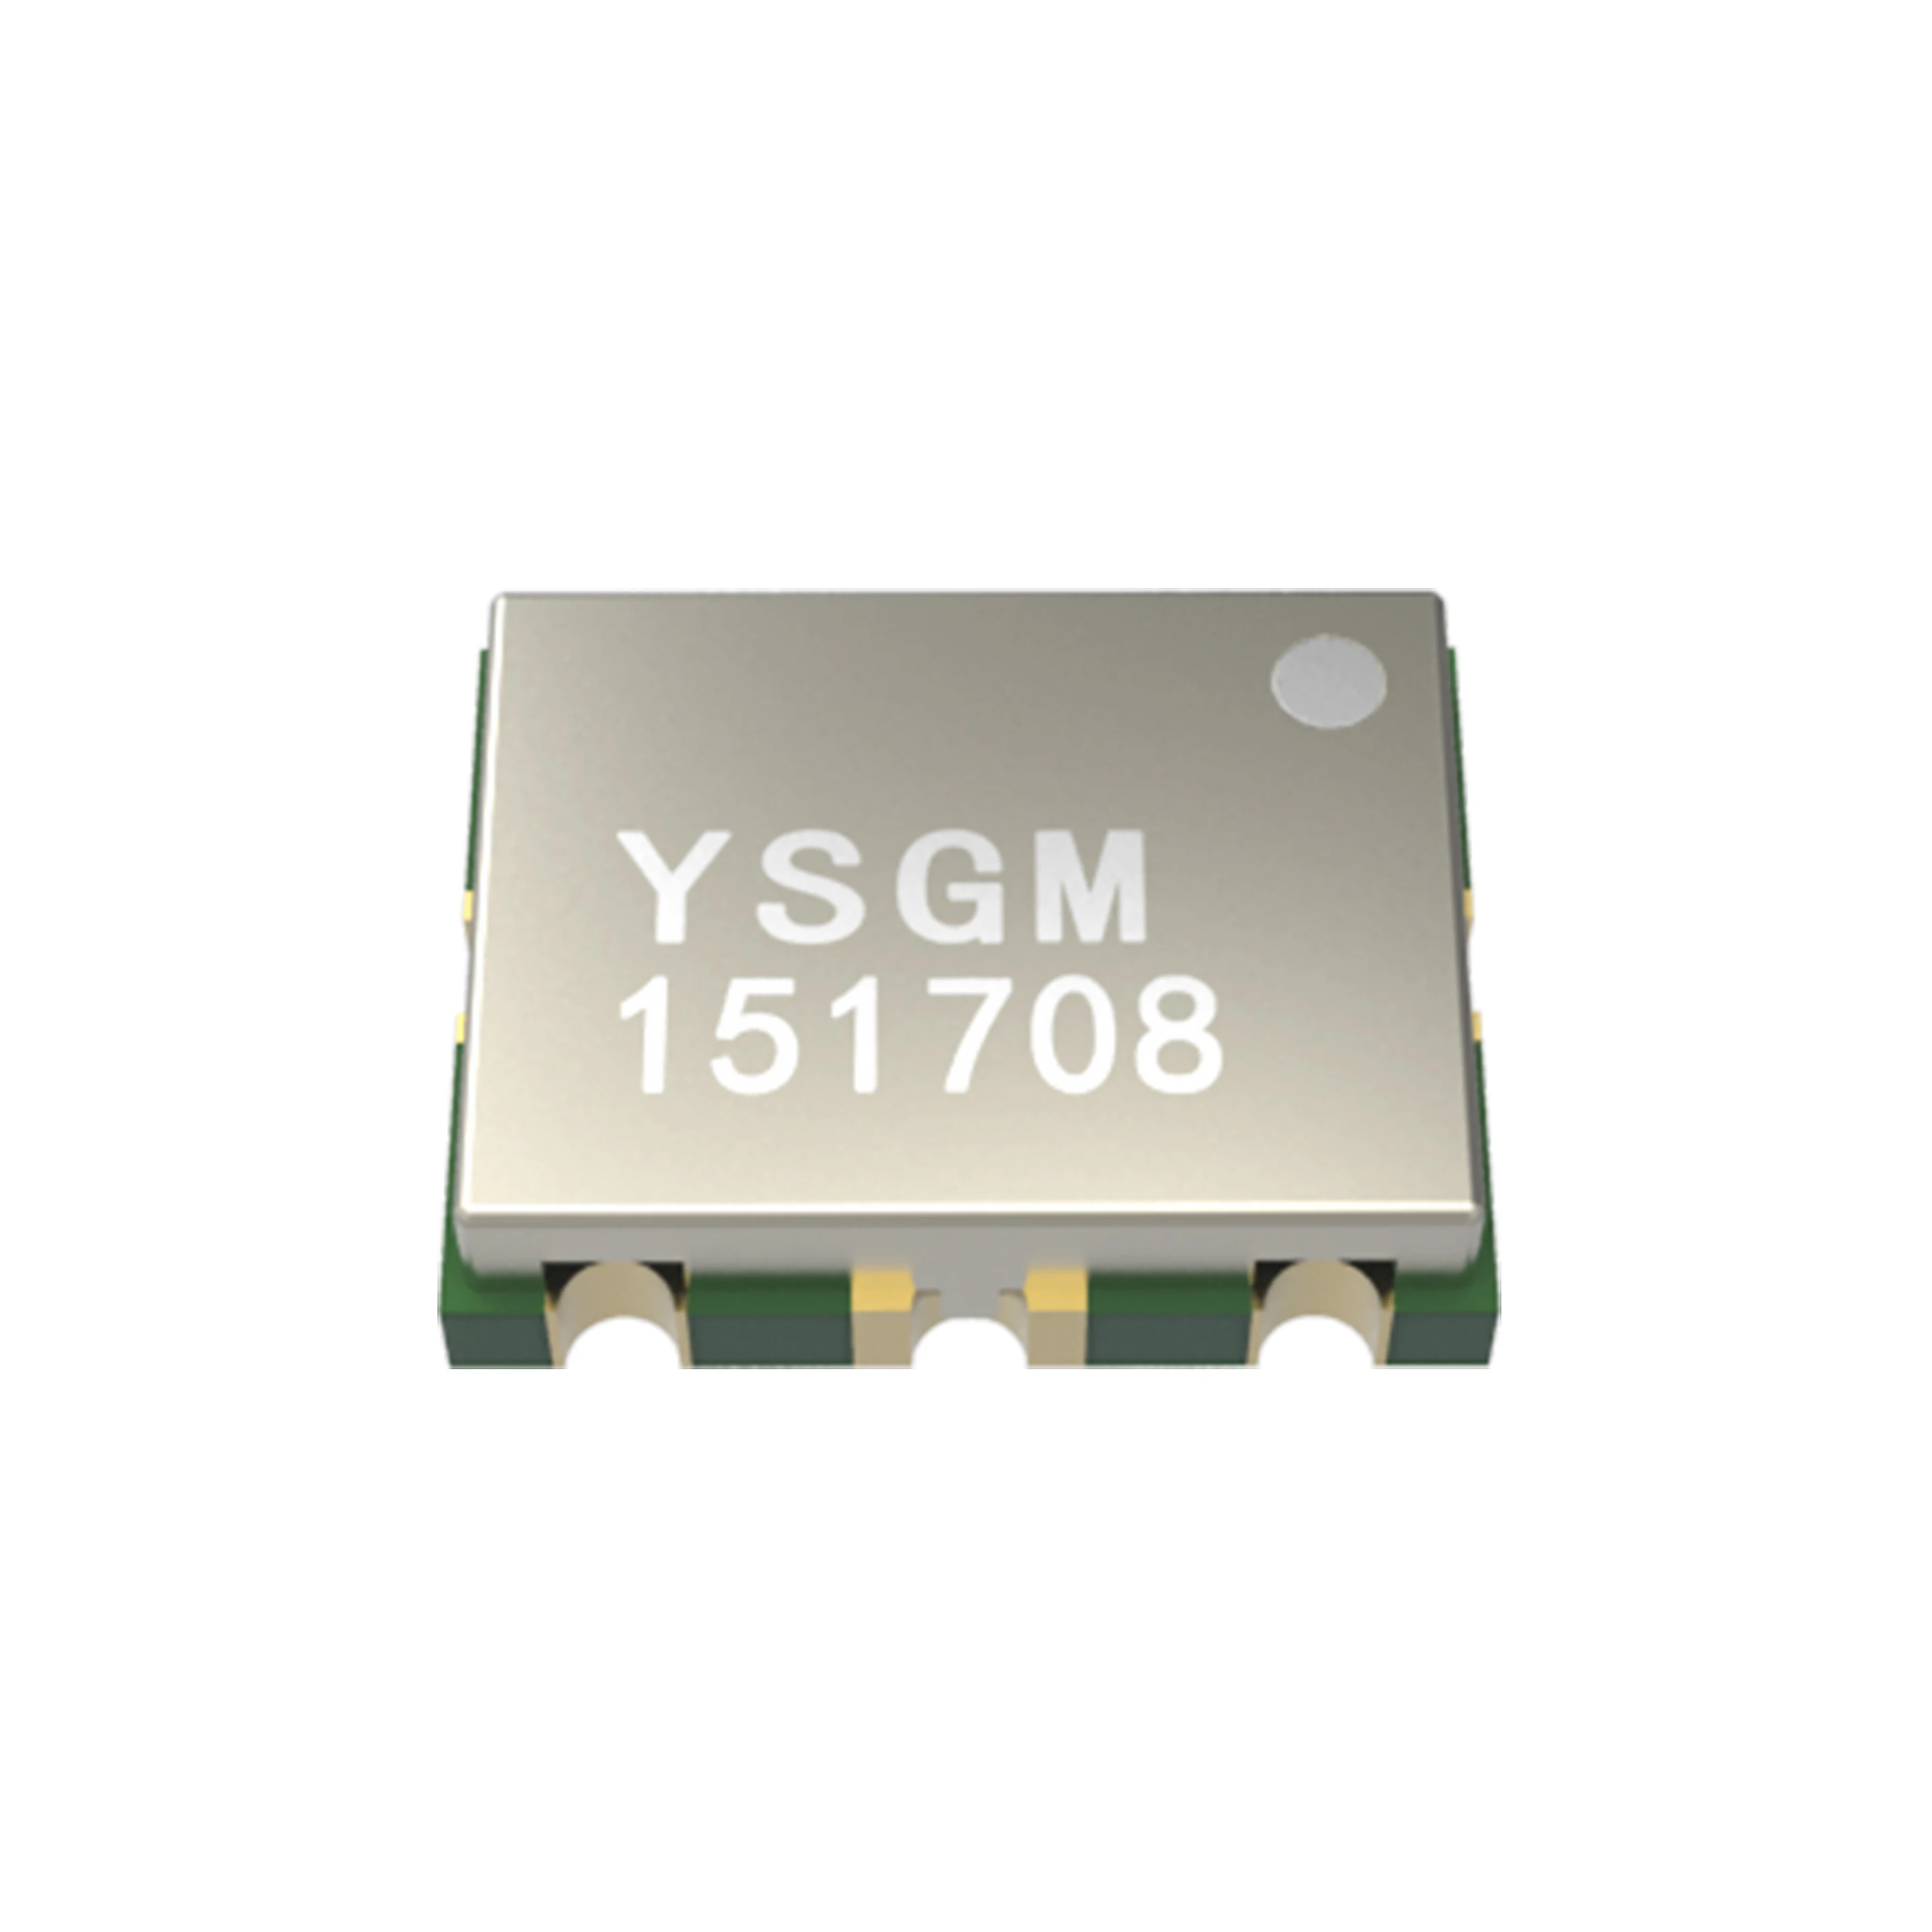 SZHUASHI 100% New VCO Voltage Controlled Oscillator +Buffer Amplifier For GPS/BDS/GLONASS(1560-1620MHz) Applications